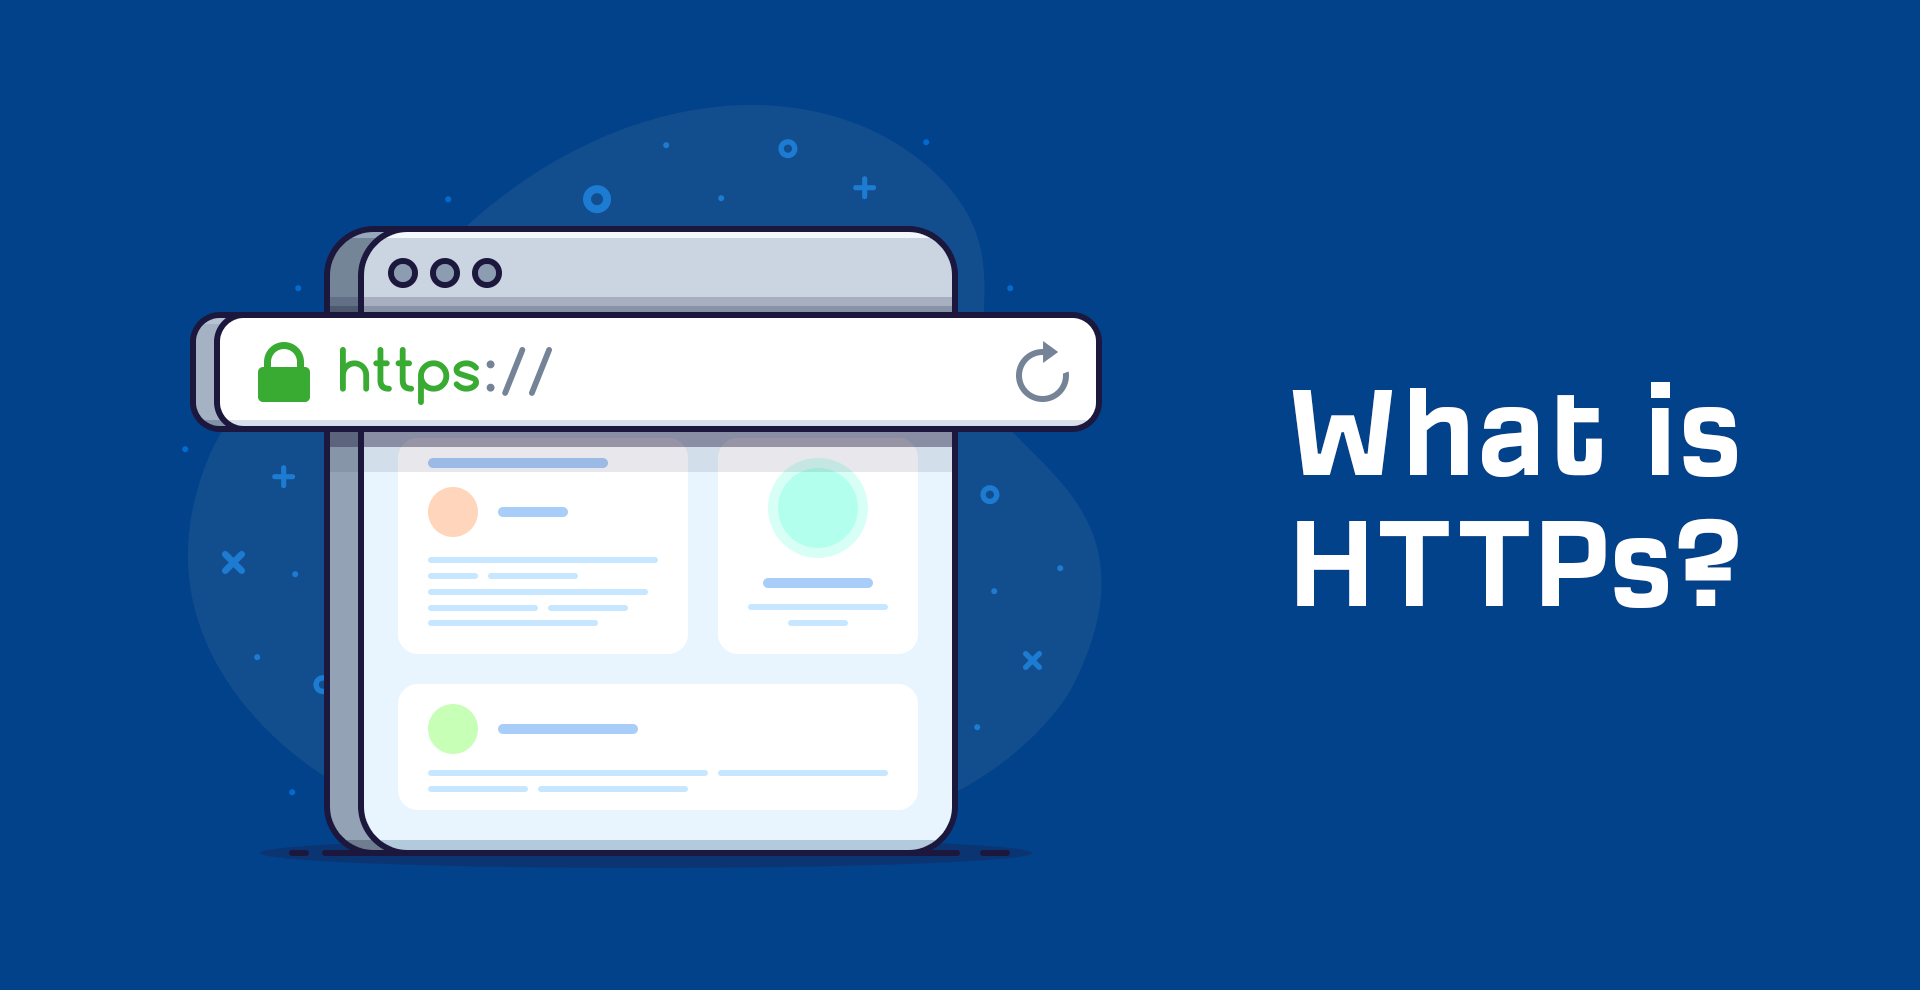 Switch to https address for SEO